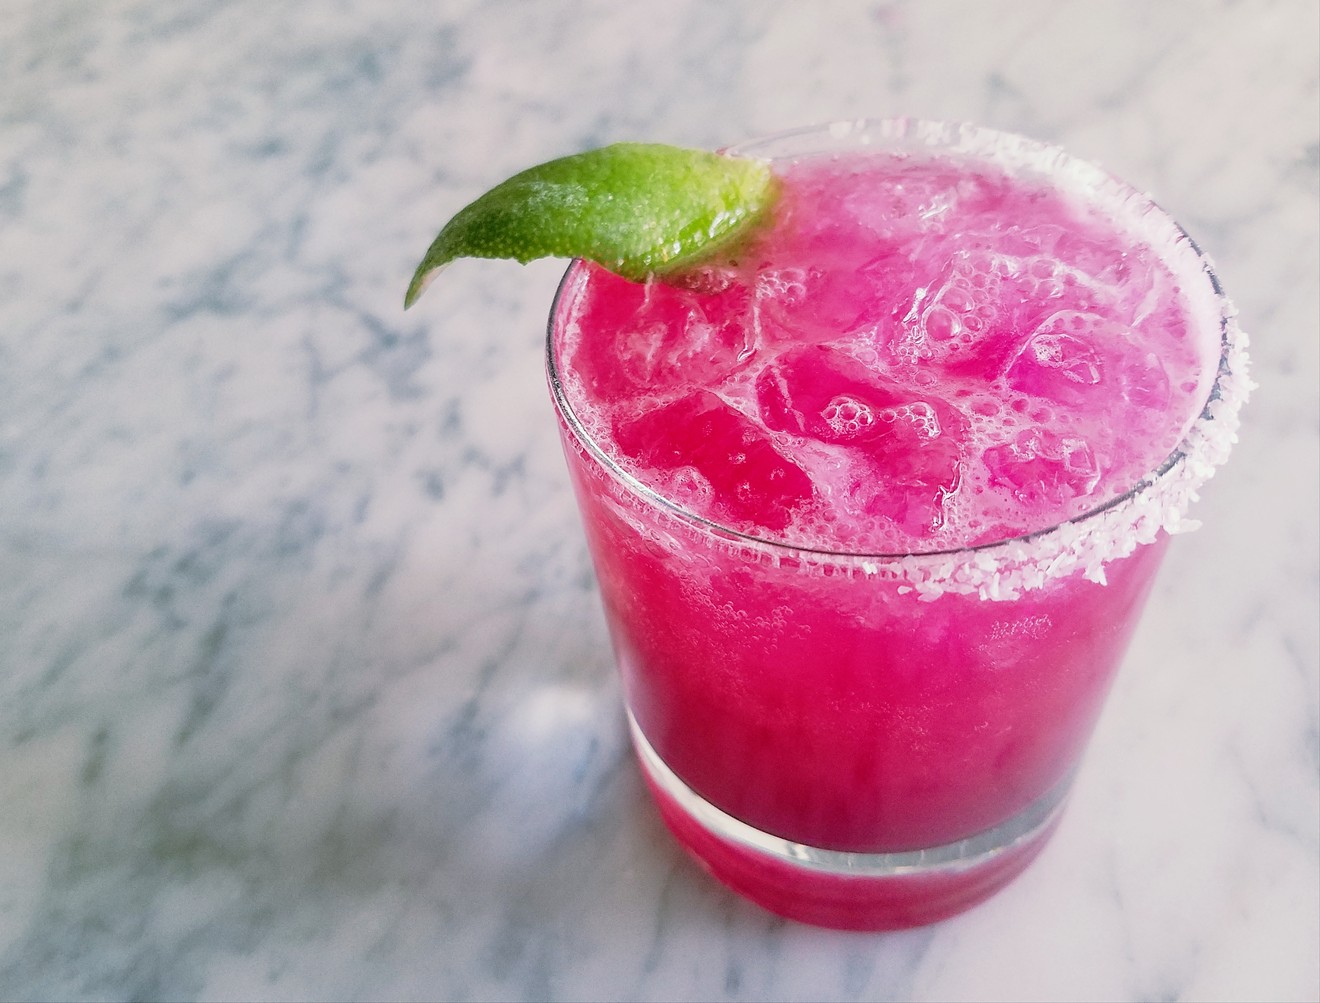 Forget your basic drink: Try a unique margarita this spring.